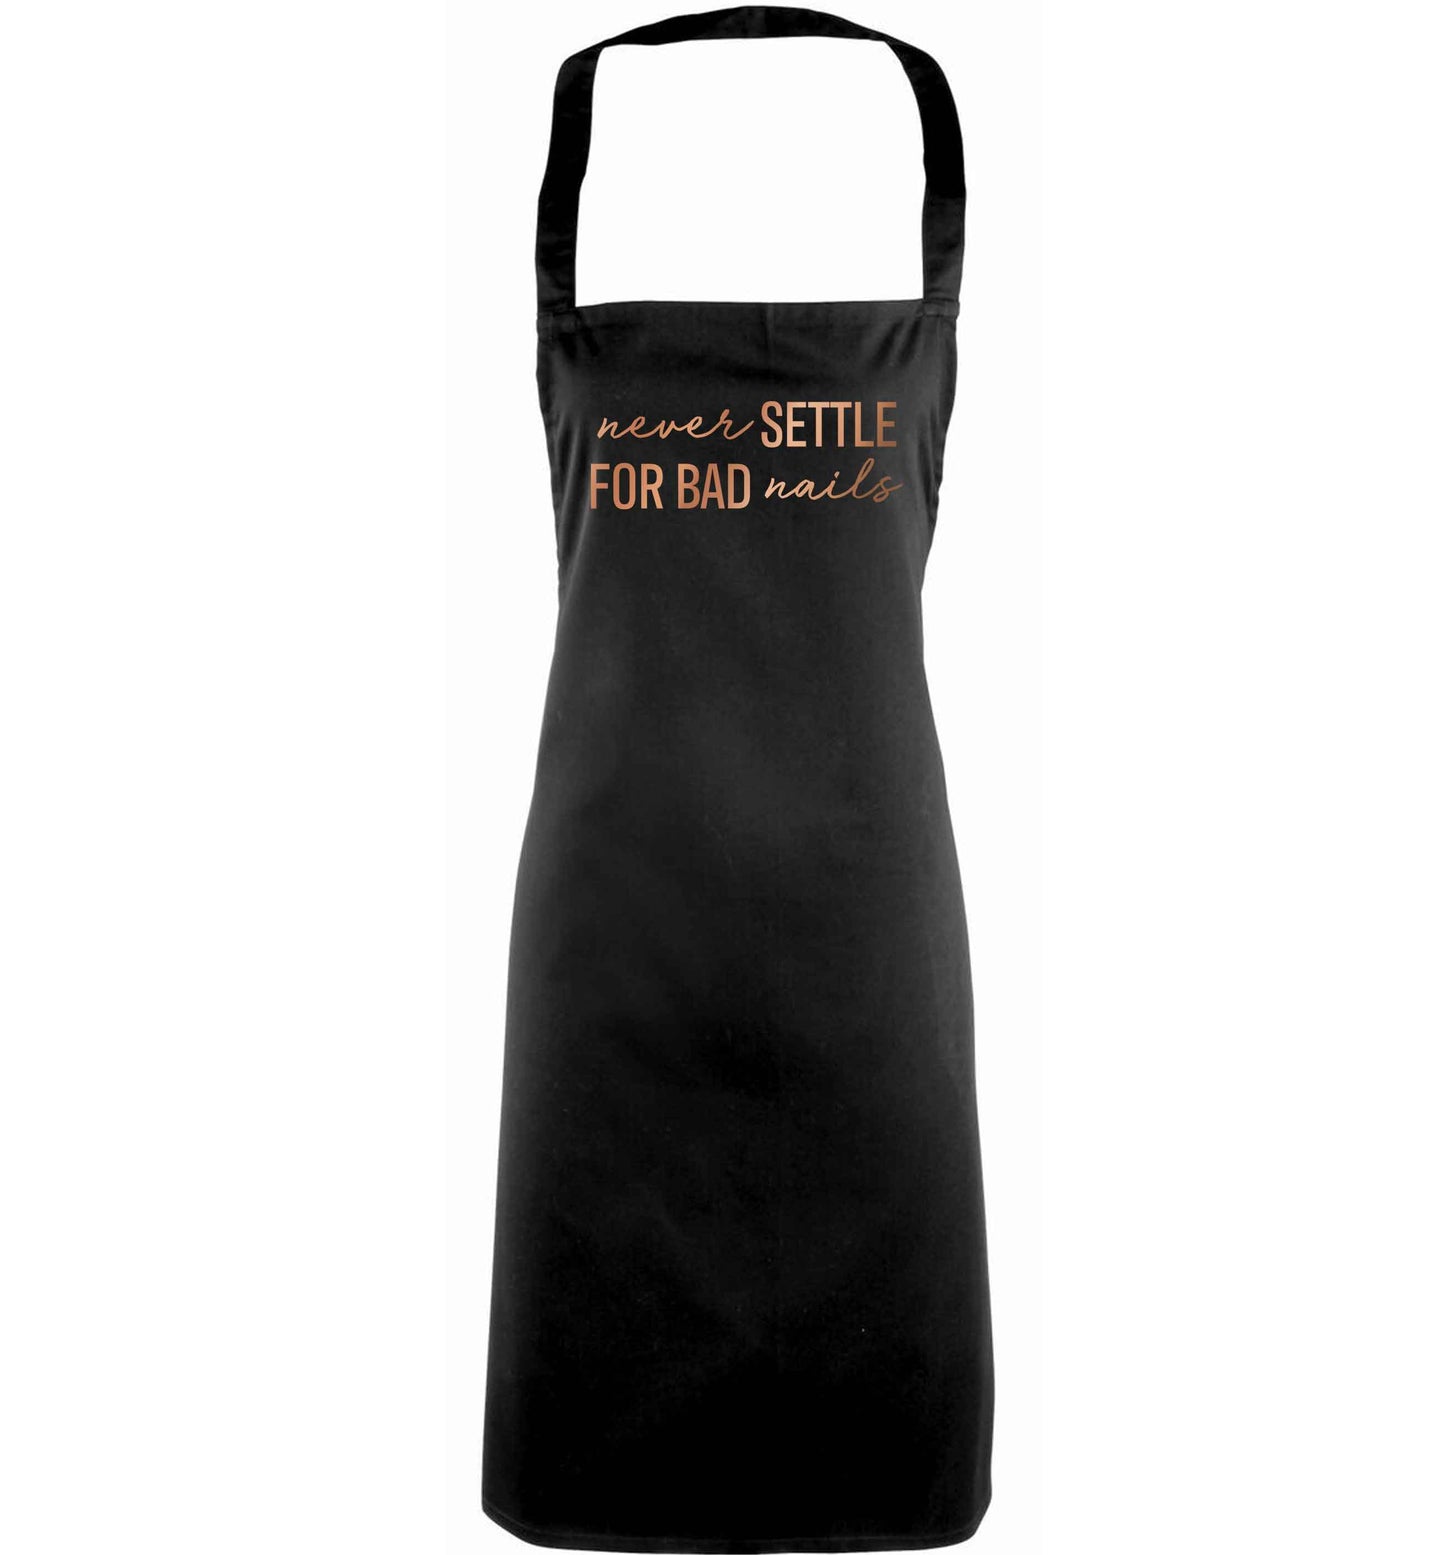 Never settle for bad nails - rose gold adults black apron